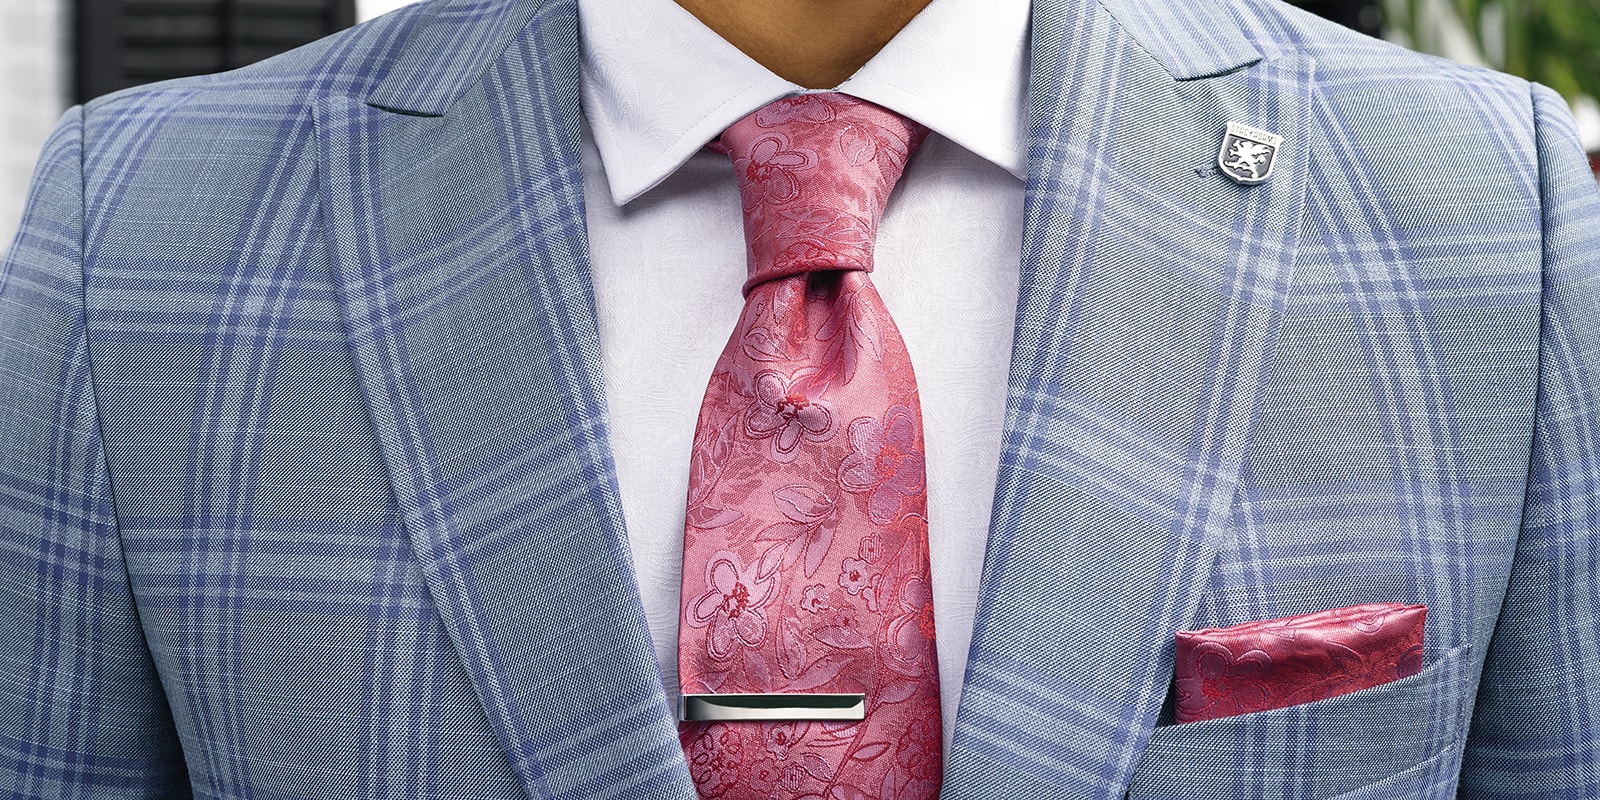 The featured image is a close up of a man wearing a formal suit, dress shirt, and tie.